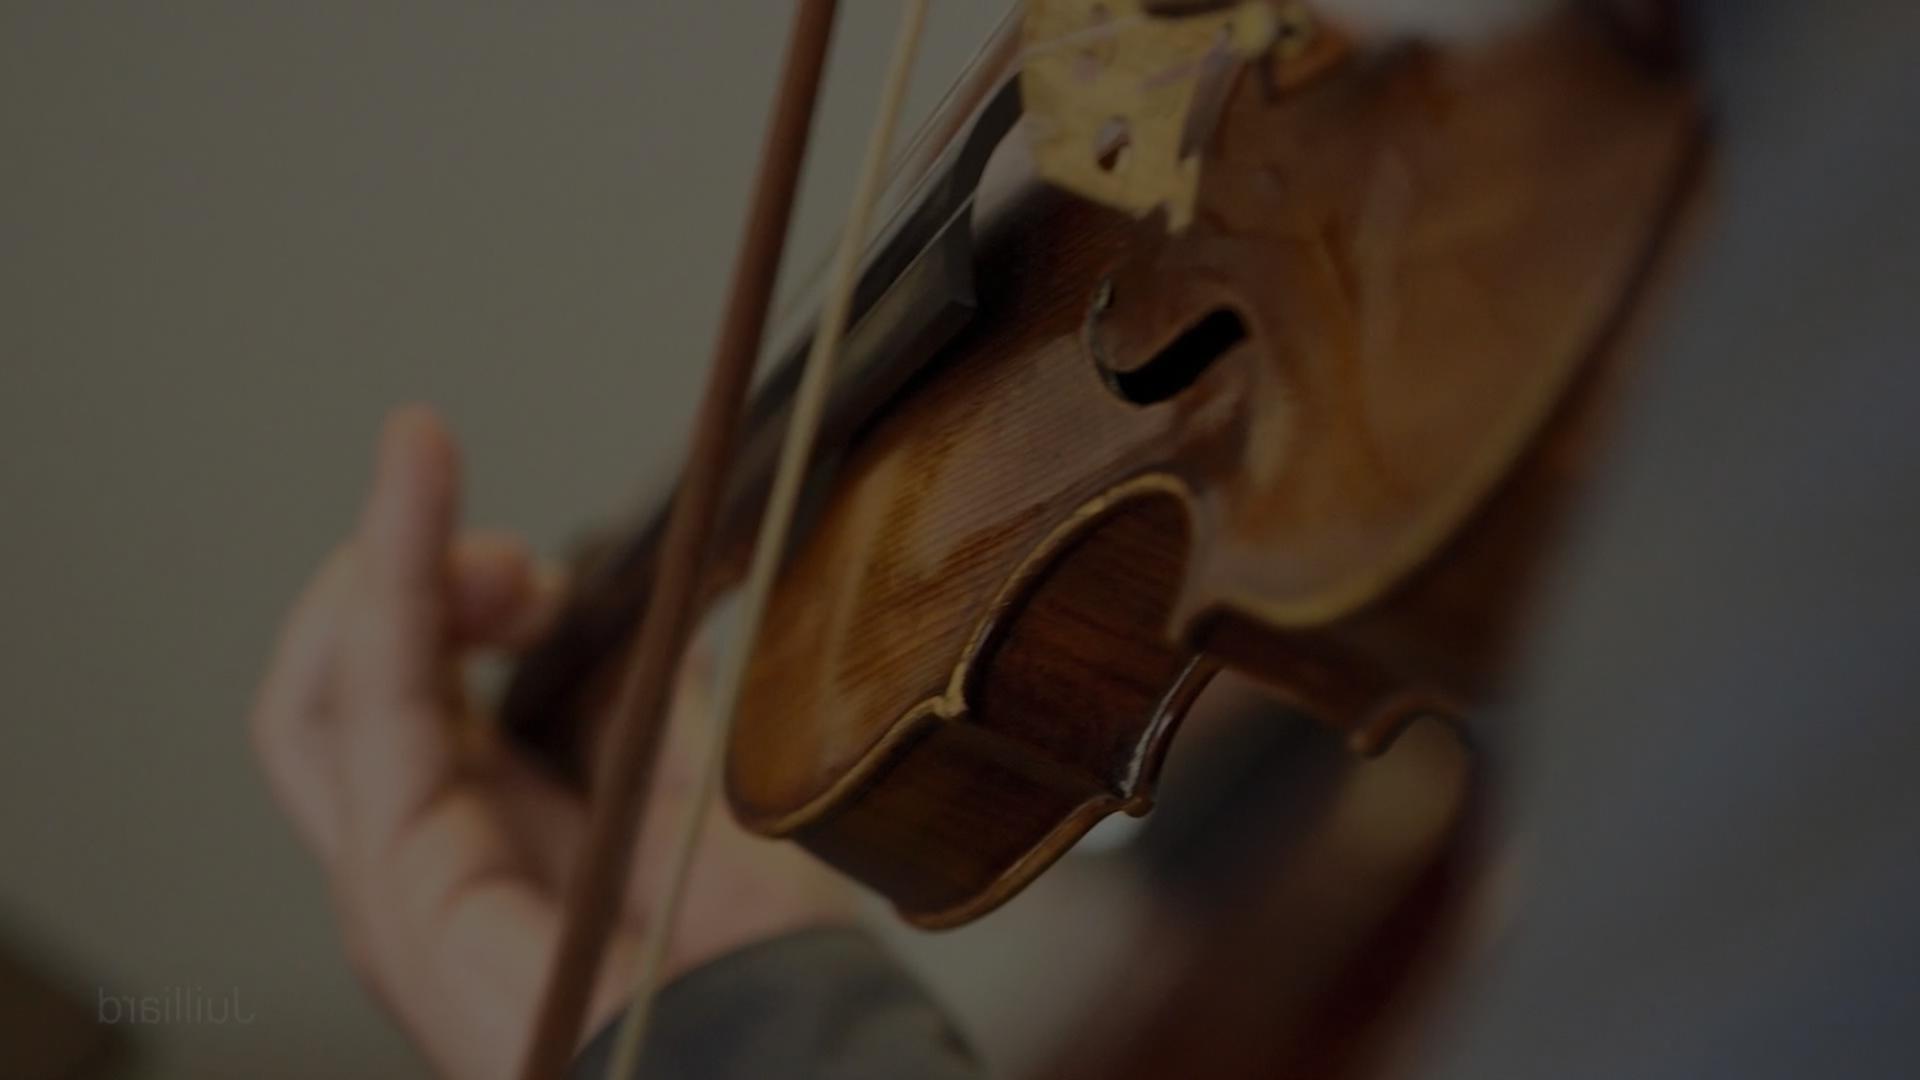 Video feature about the Juilliard String Quartet on their 70th anniversary